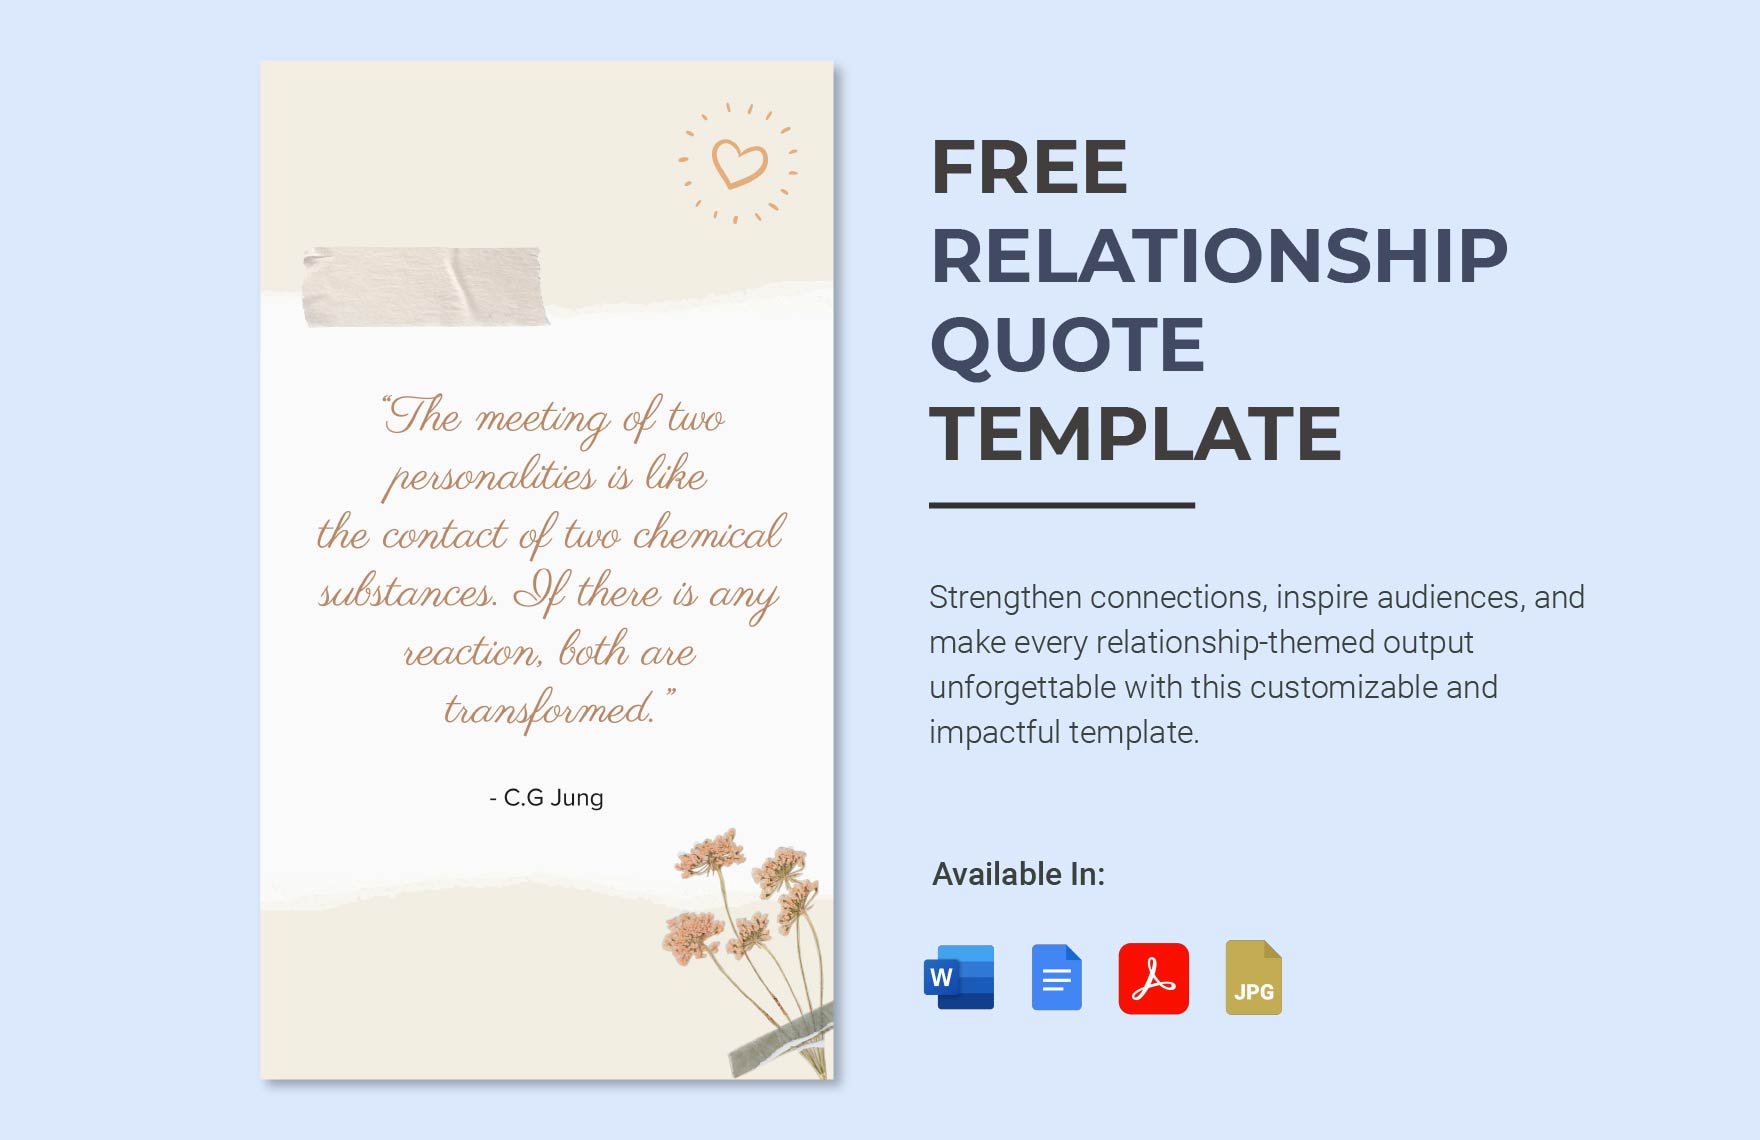 Free Relationship Quote Template in Word, Google Docs, PDF, JPG